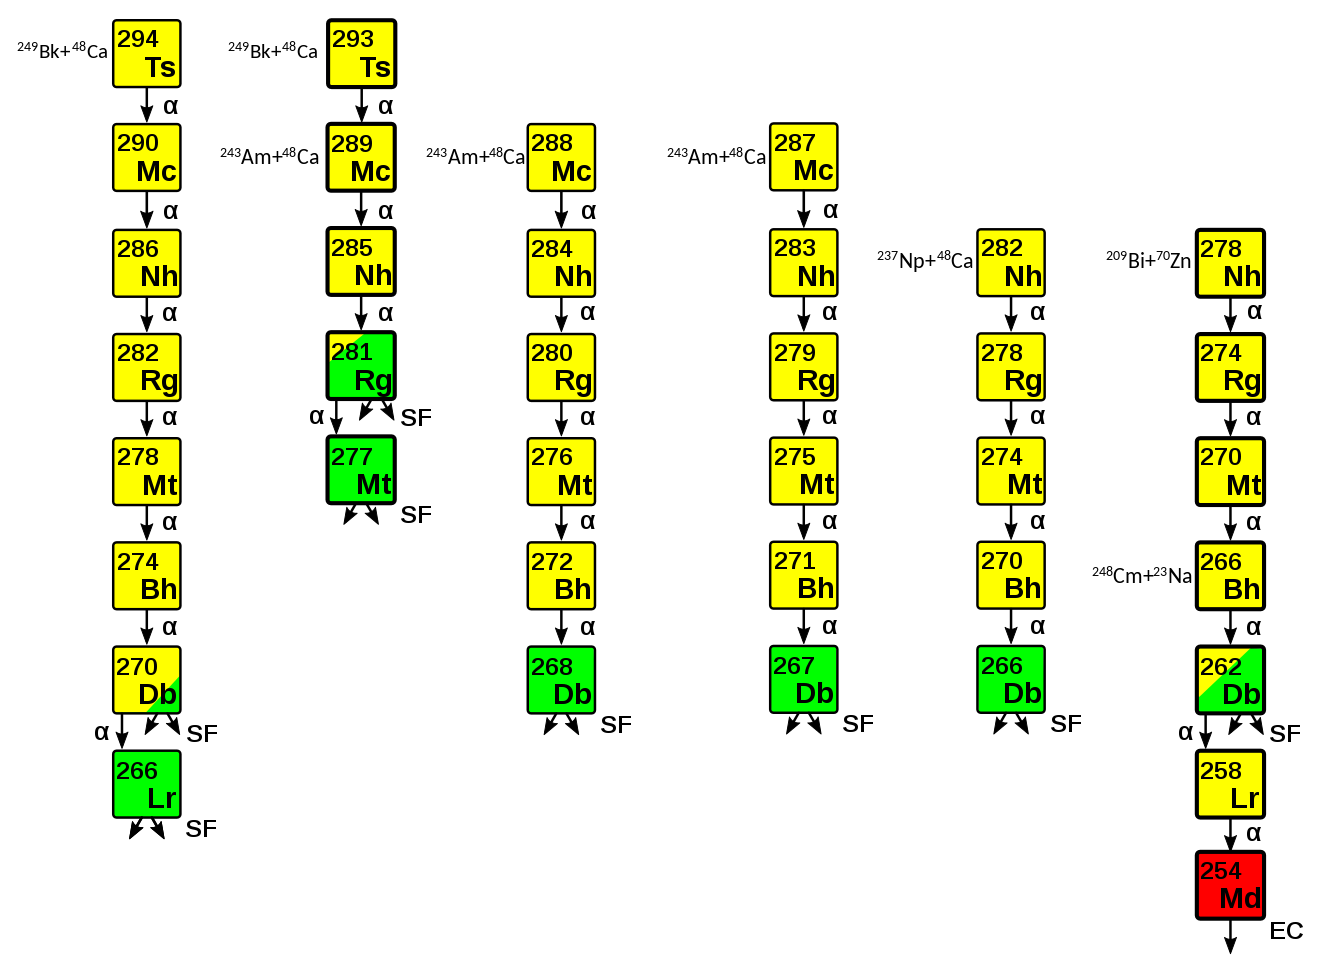 Summary of decay chains passing through isotopes of element 113, ending at mendelevium (element 101) or earlier. The two chains with bold-bordered nuclides were accepted by the JWP as evidence for the discoveries of element 113 and its parents, elements 115 and 117. Data is presented as known in 2015 (before the JWP's conclusions were published).